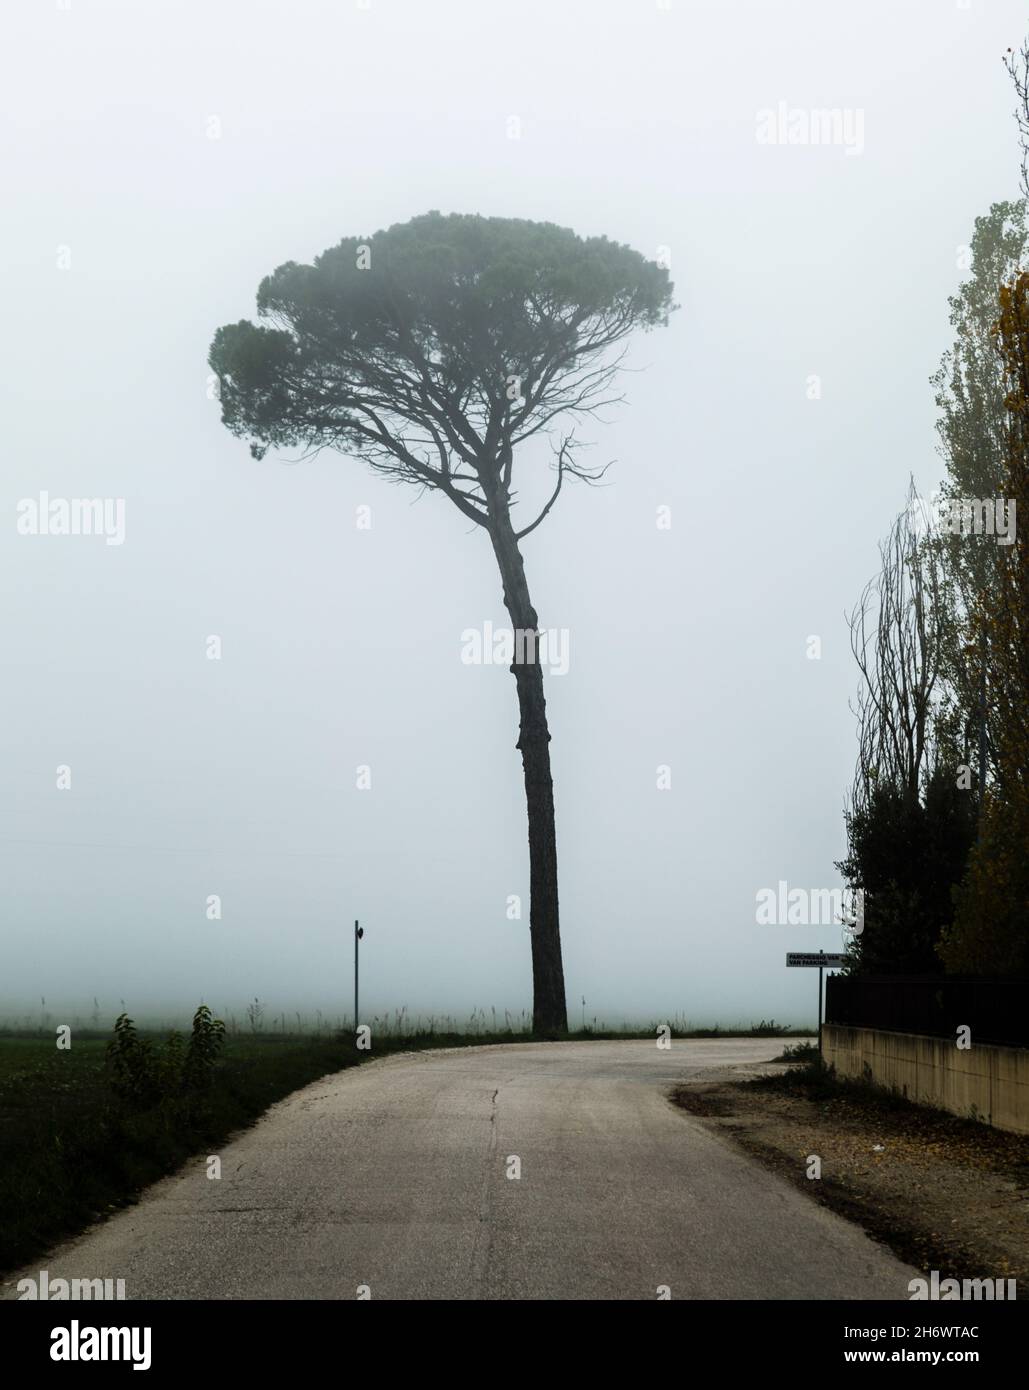 A single Stone Pine tree by a road near Montefalco in the misty Umbrian valley. Stock Photo